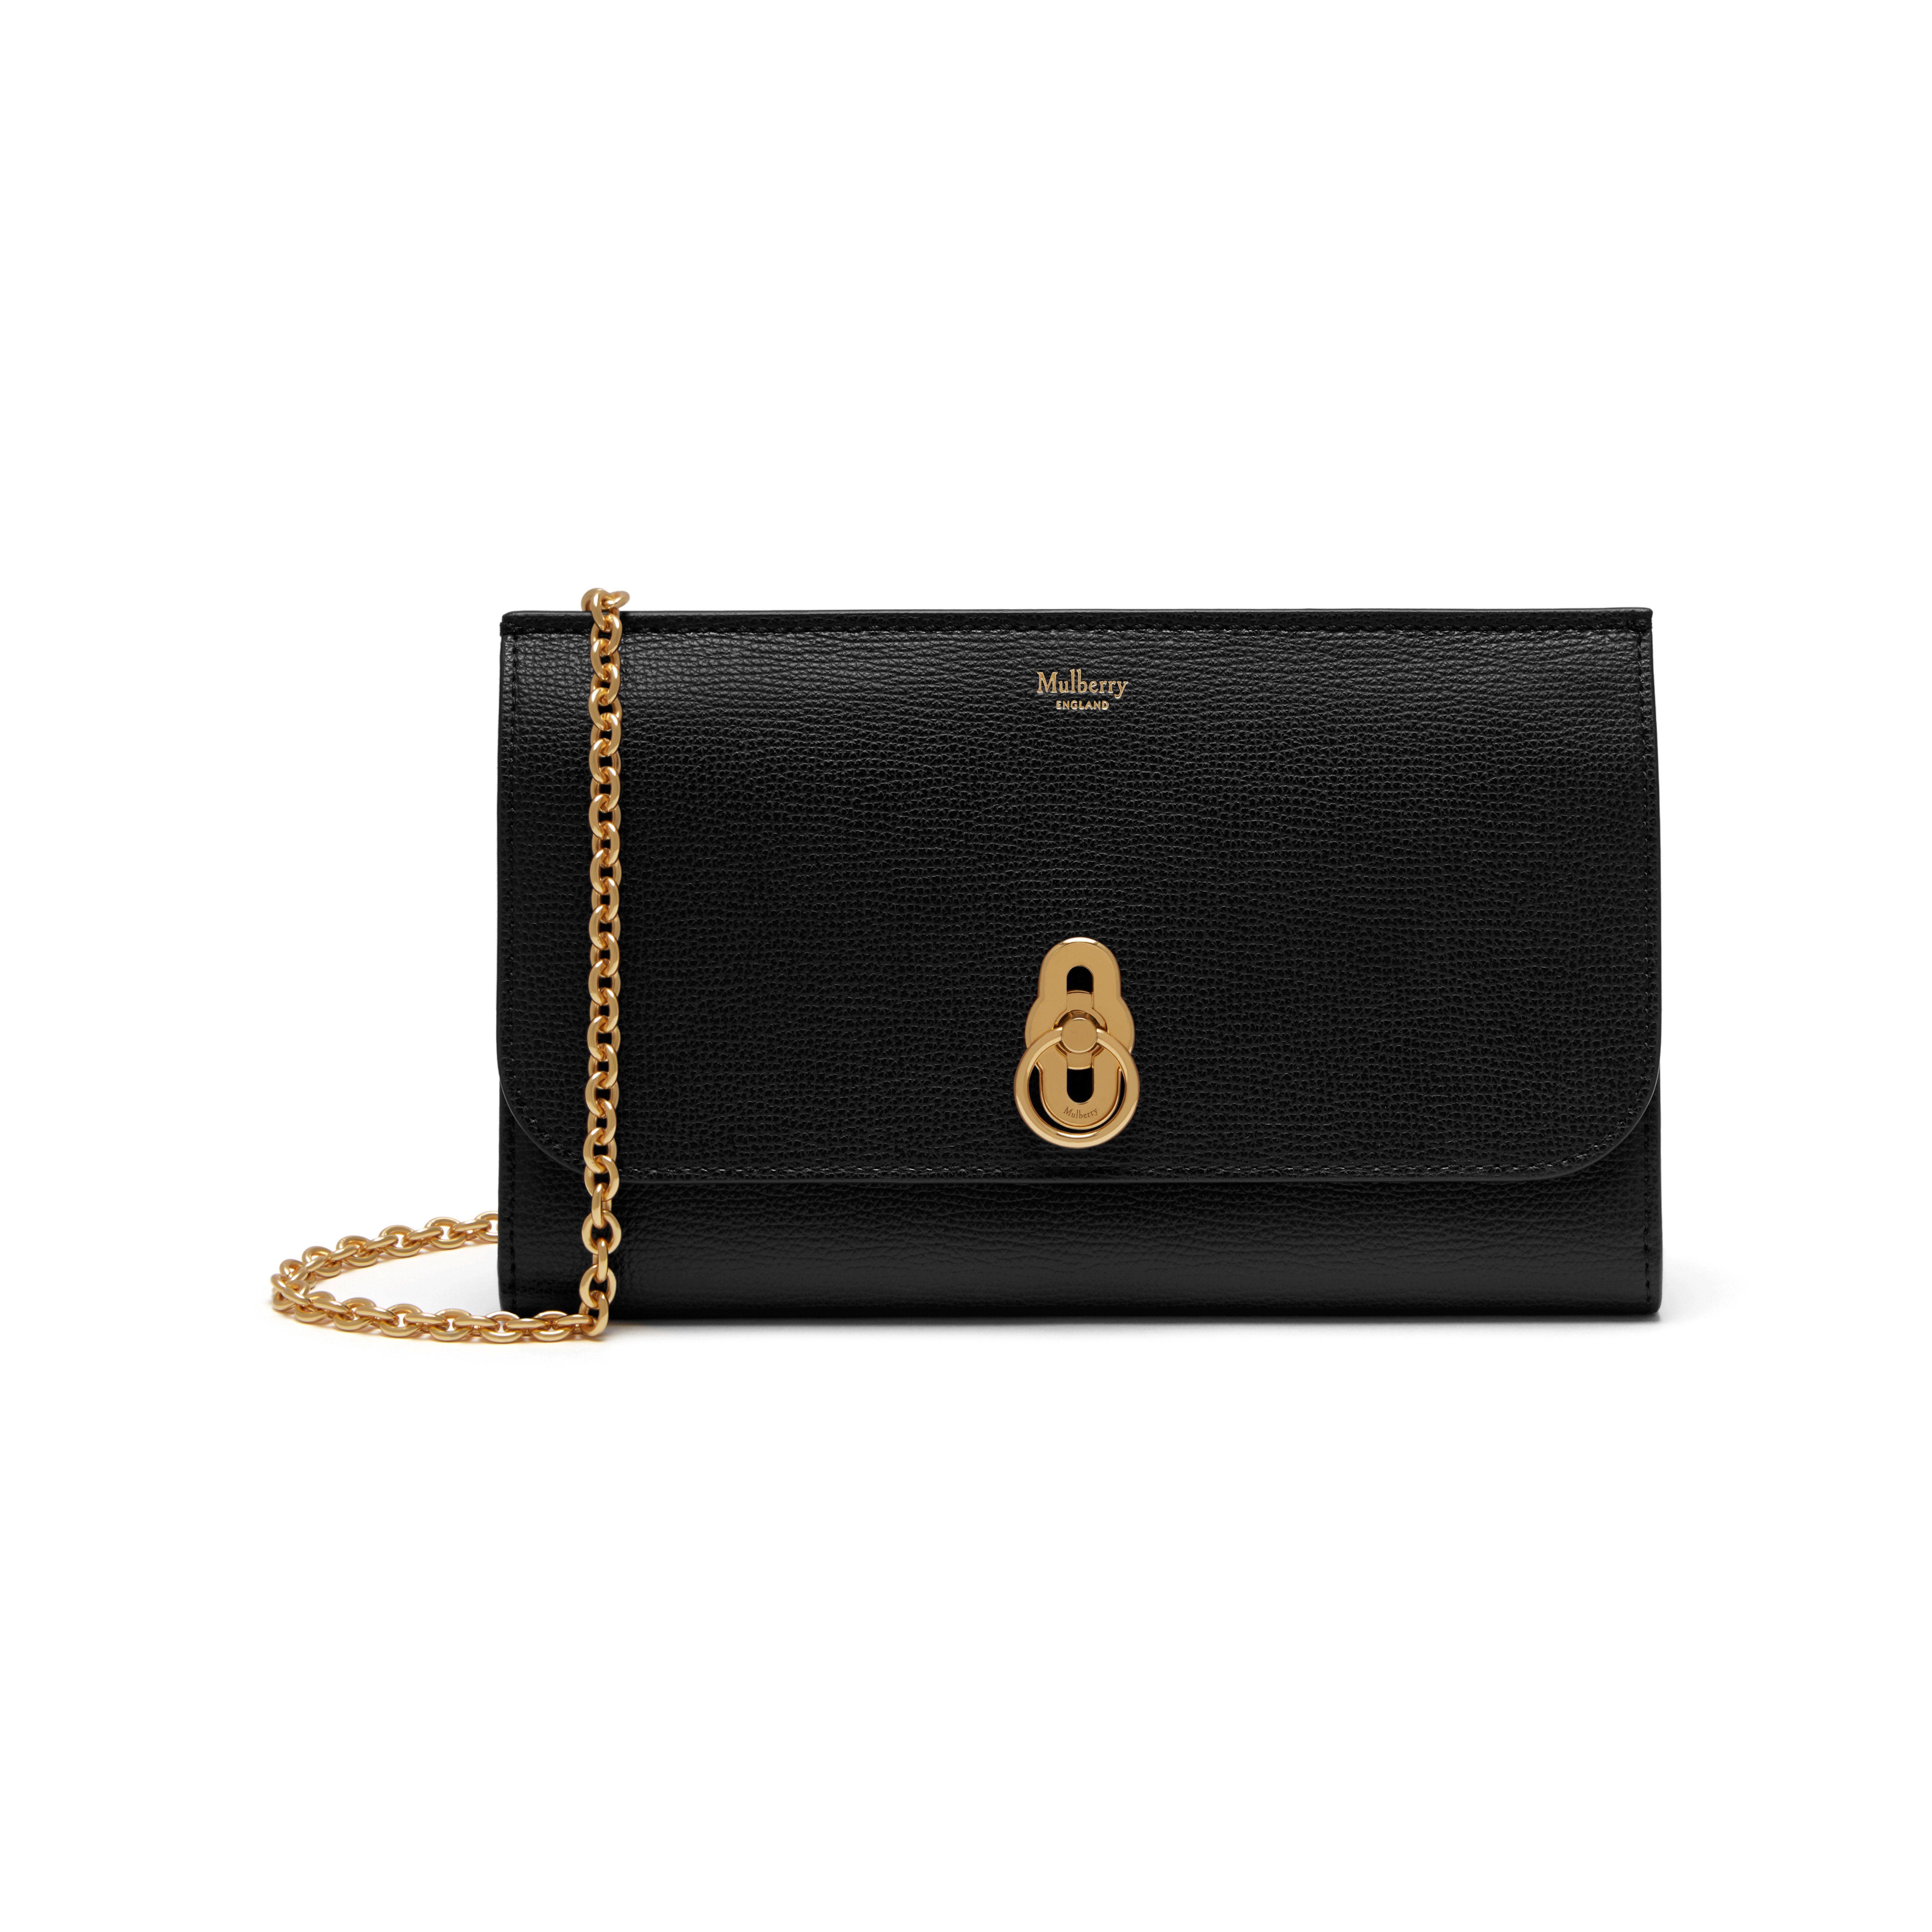 Mulberry Leather Amberley Clutch Bag in Black - Save 12% - Lyst